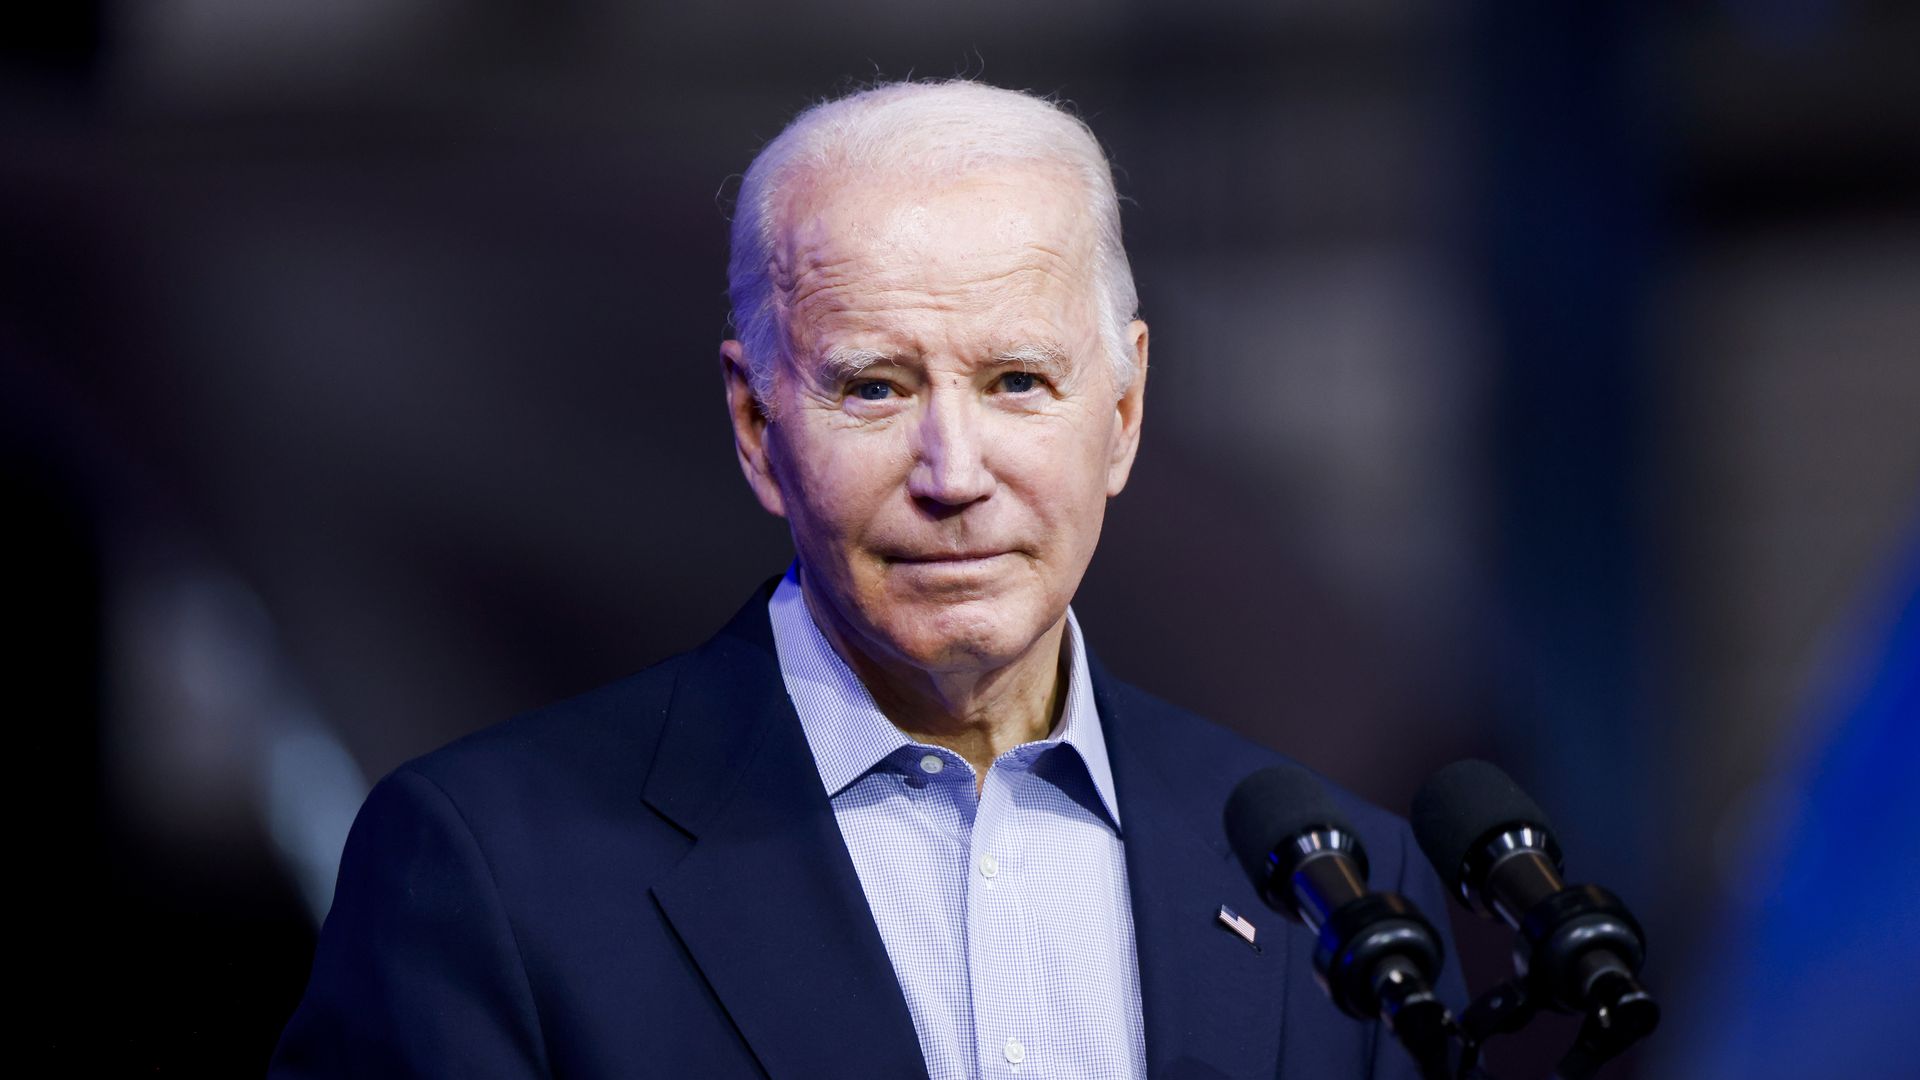 President Biden speaks at an event in Pueblo in November. Photo: Michael Ciaglo/Getty Images